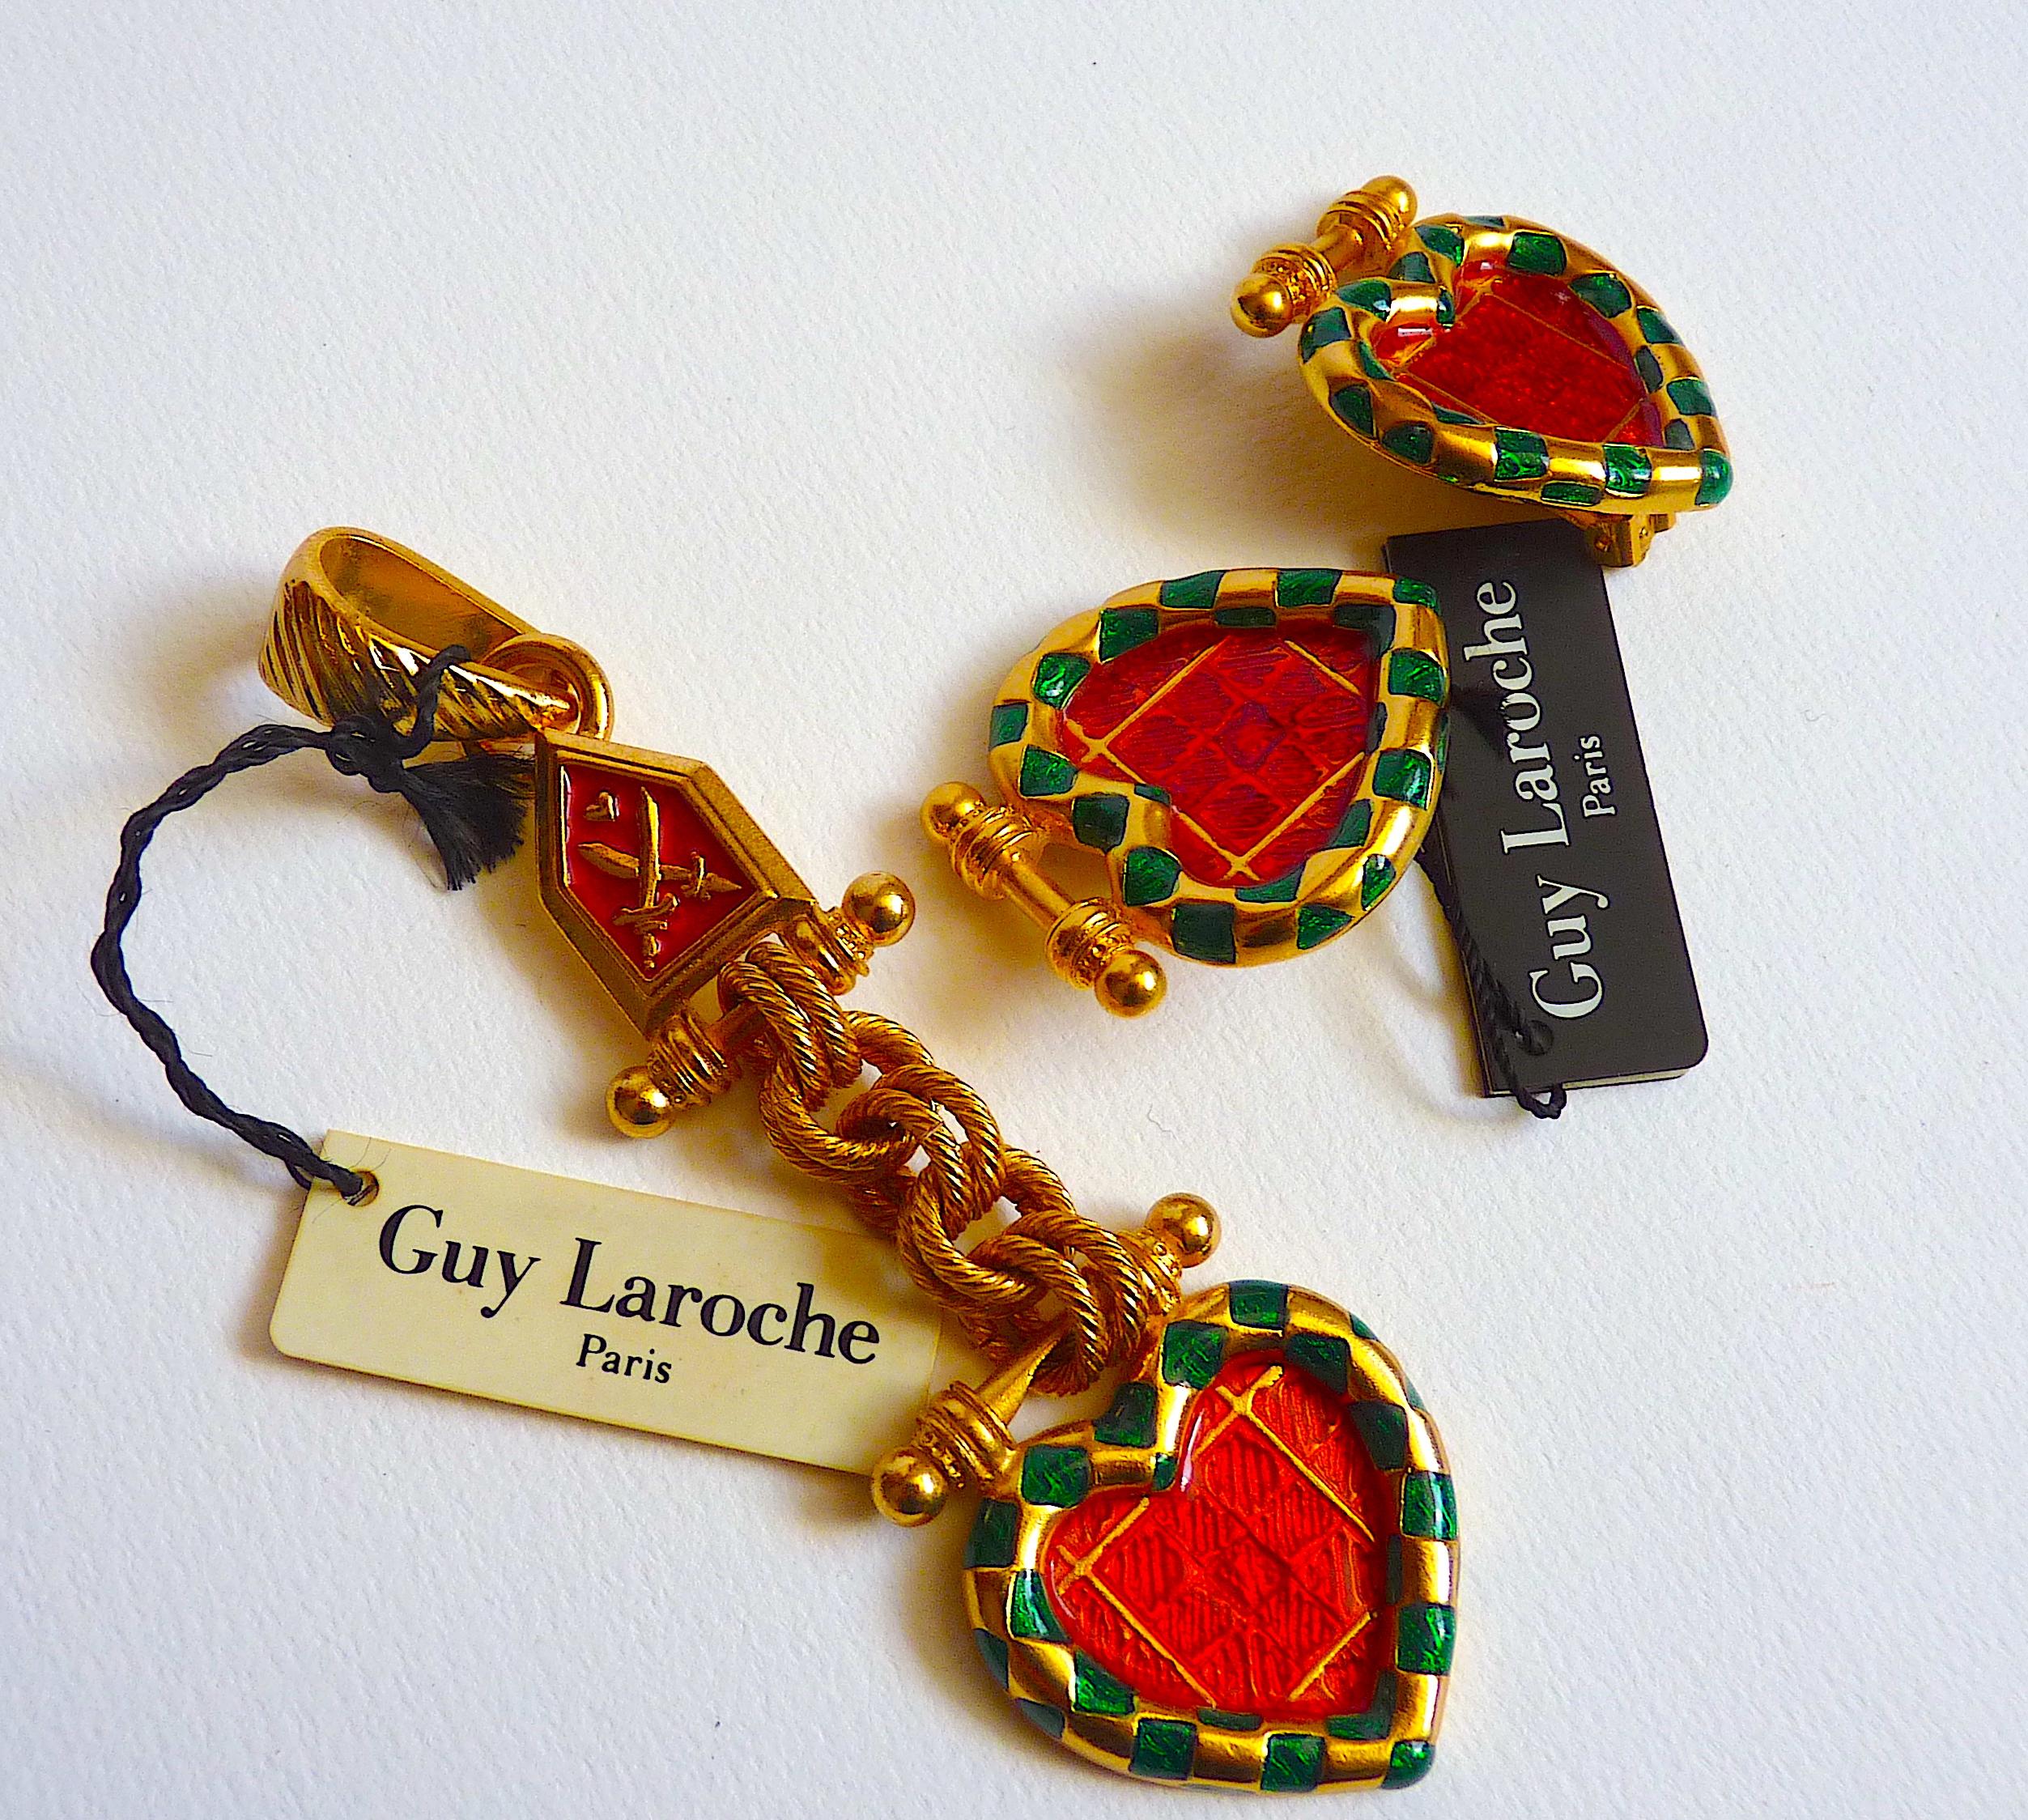 GUY LAROCHE PARIS Enameled Heart Necklace Pendant from 1980s For Sale 4